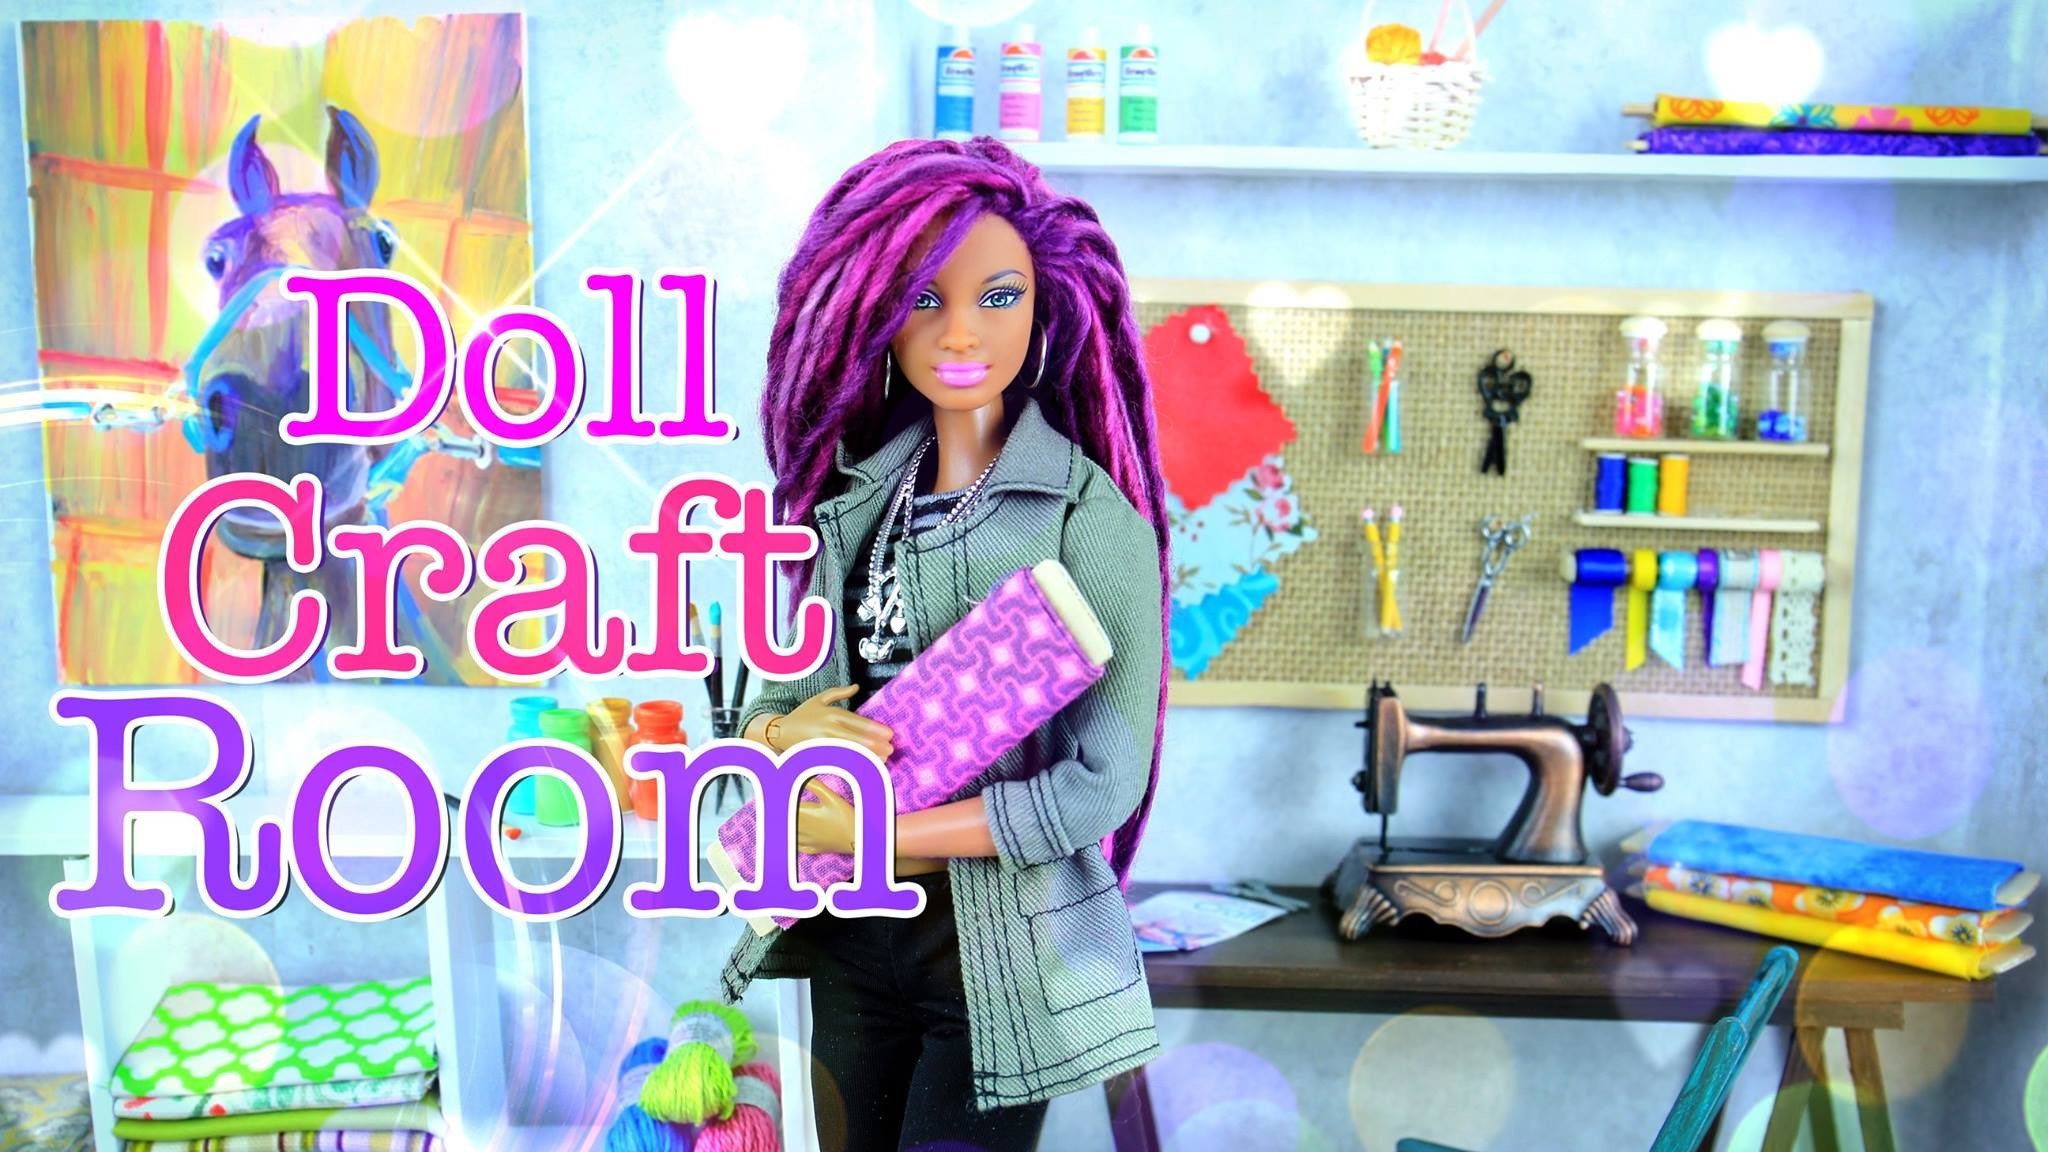 How to Make a Doll Room in a Box: Craft Room - Doll Crafts